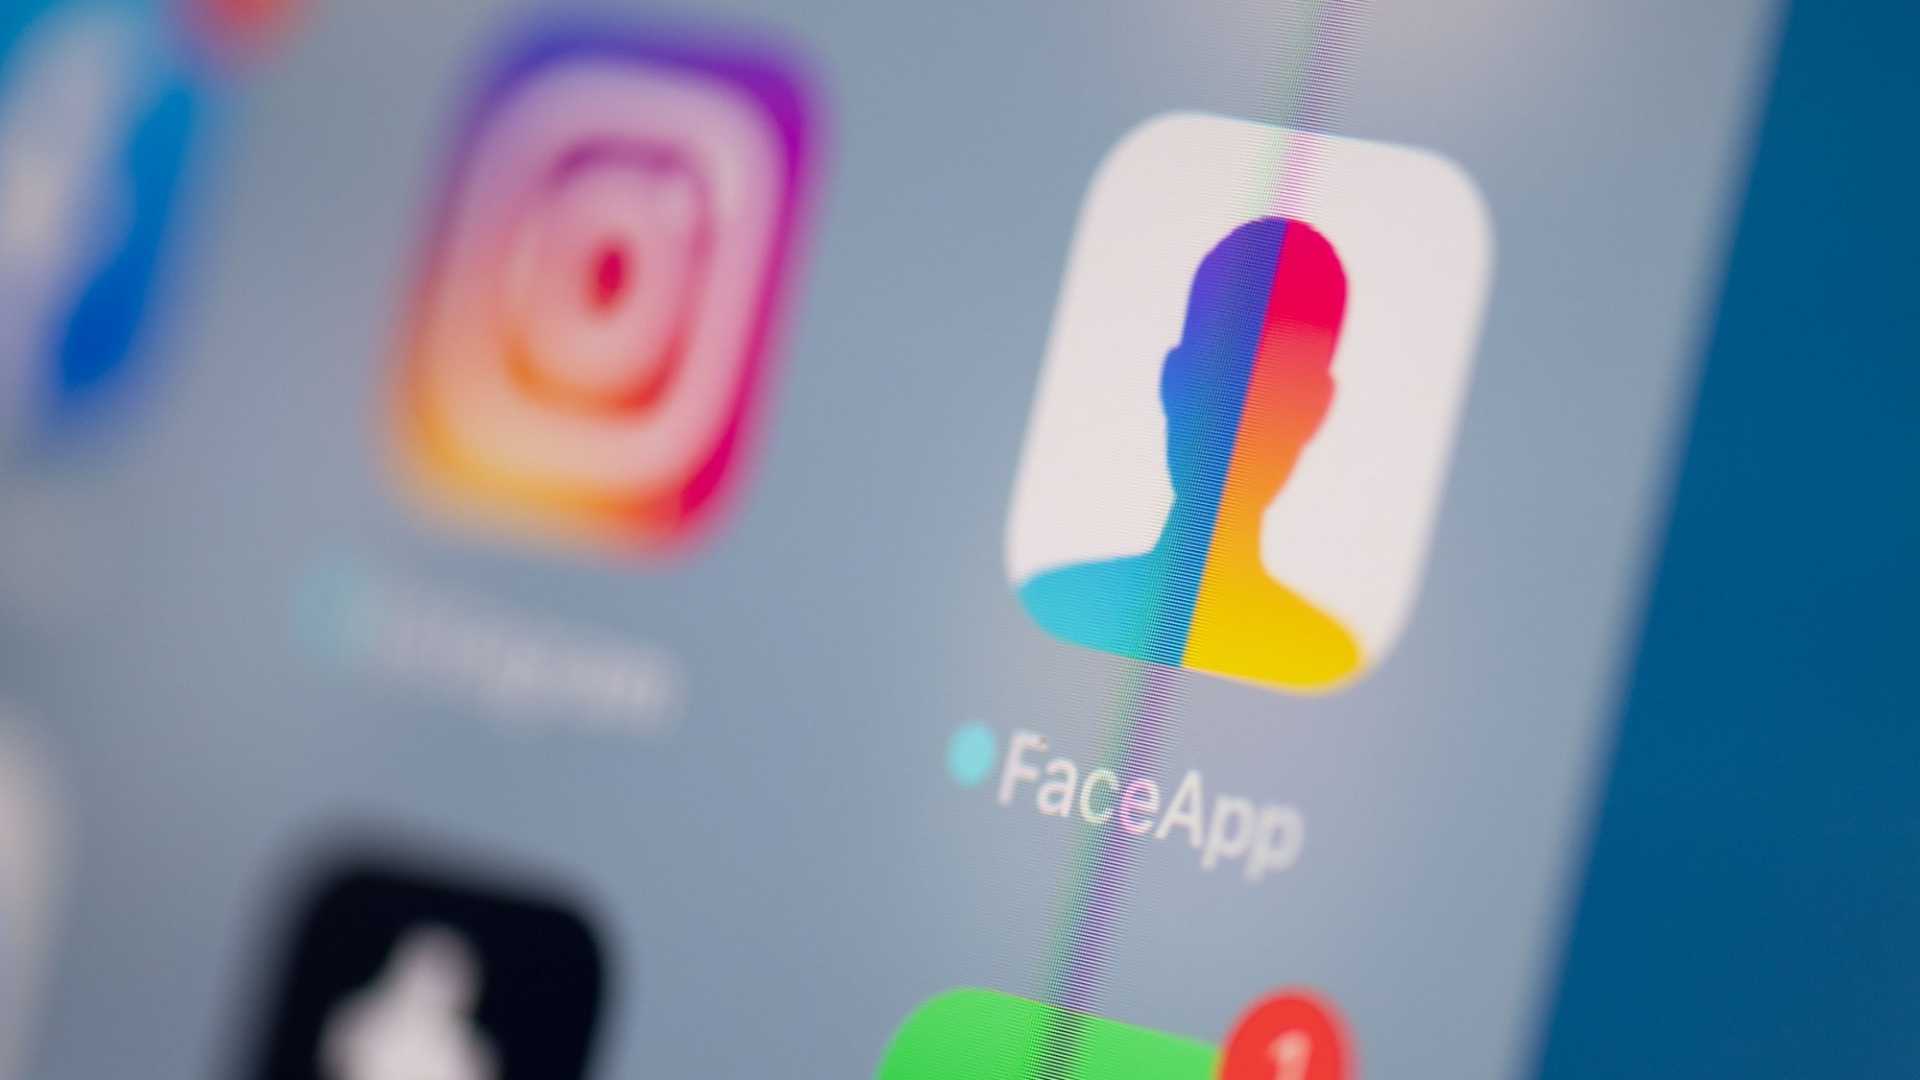 Faceapp Went Viral Now The Fbi Is Calling It A Potential